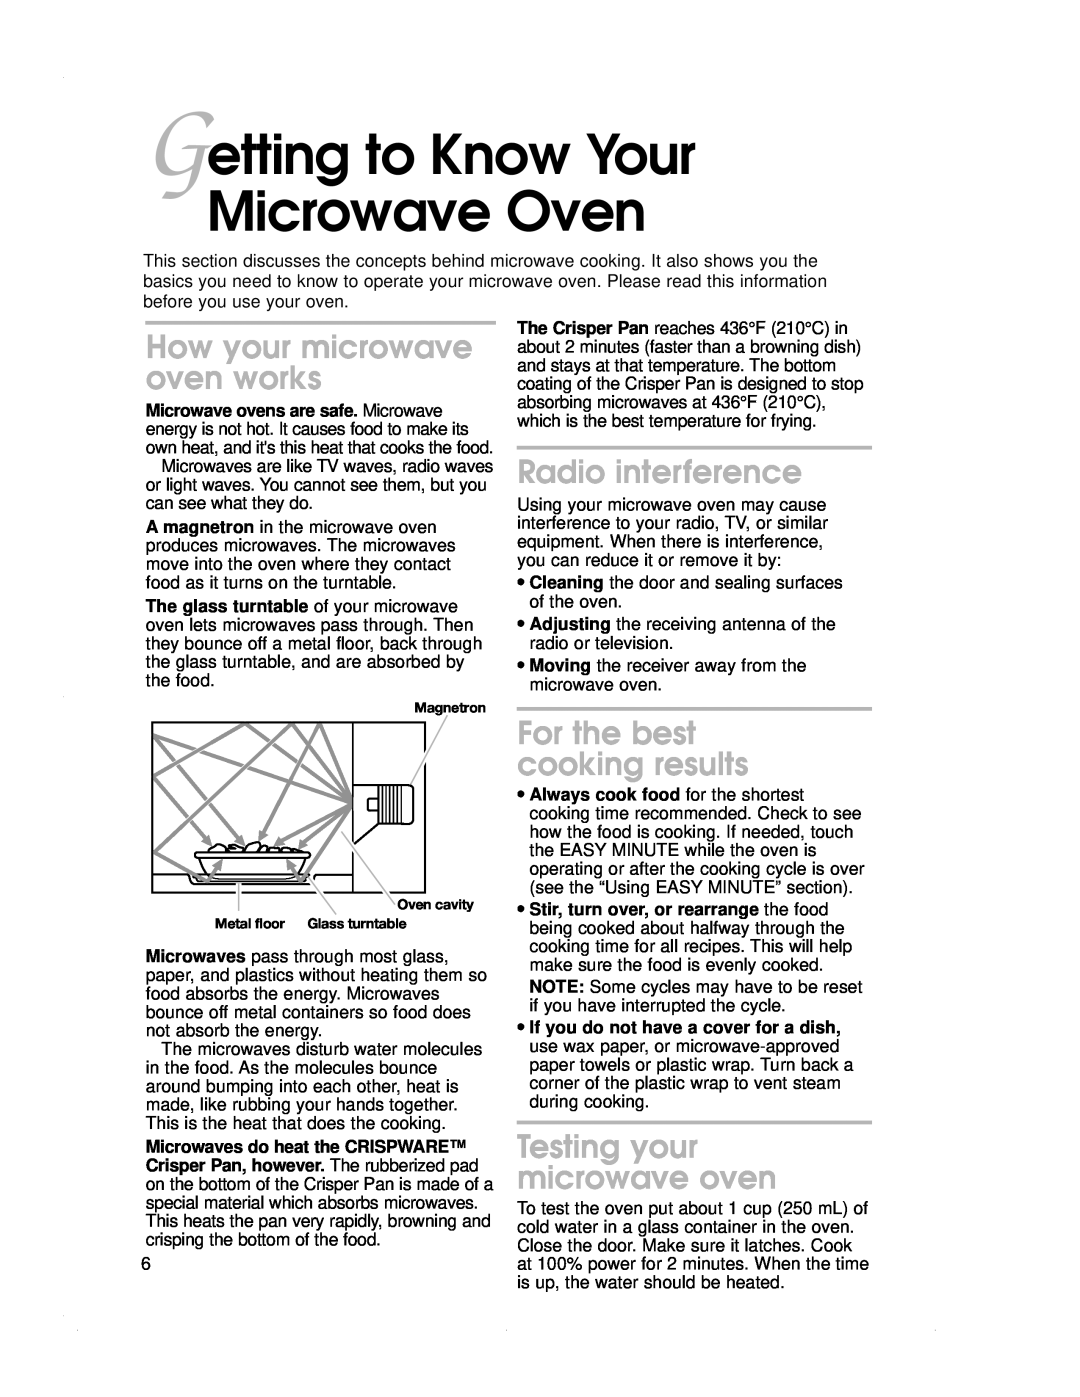 KitchenAid KBMC147H, KBMC140H Getting to Know Your Microwave Oven, How your microwave oven works, Radio interference 